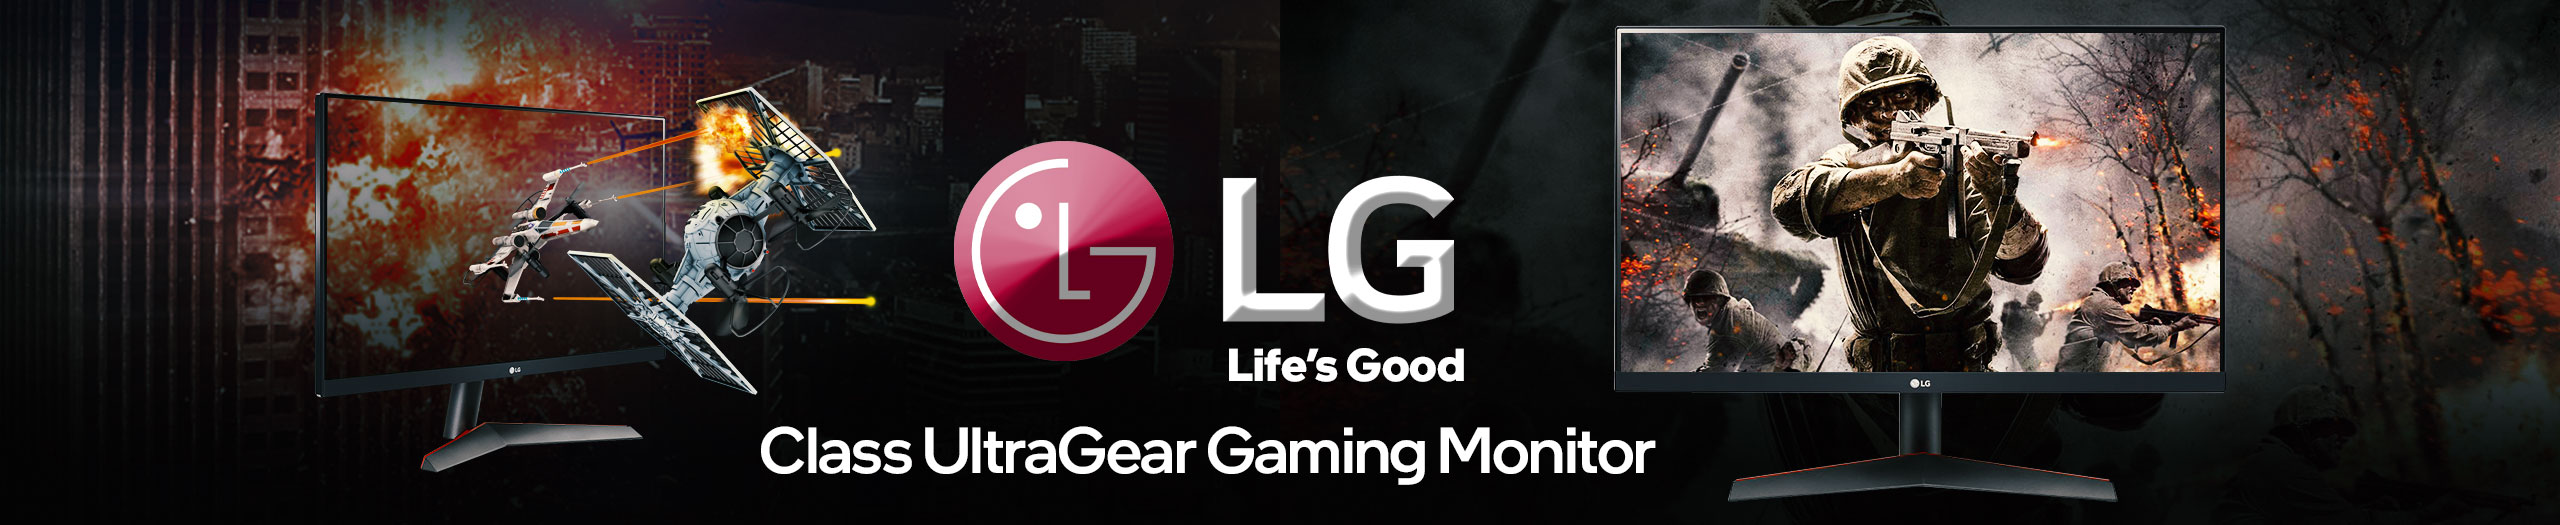 LG Monitor Deals in South Africa